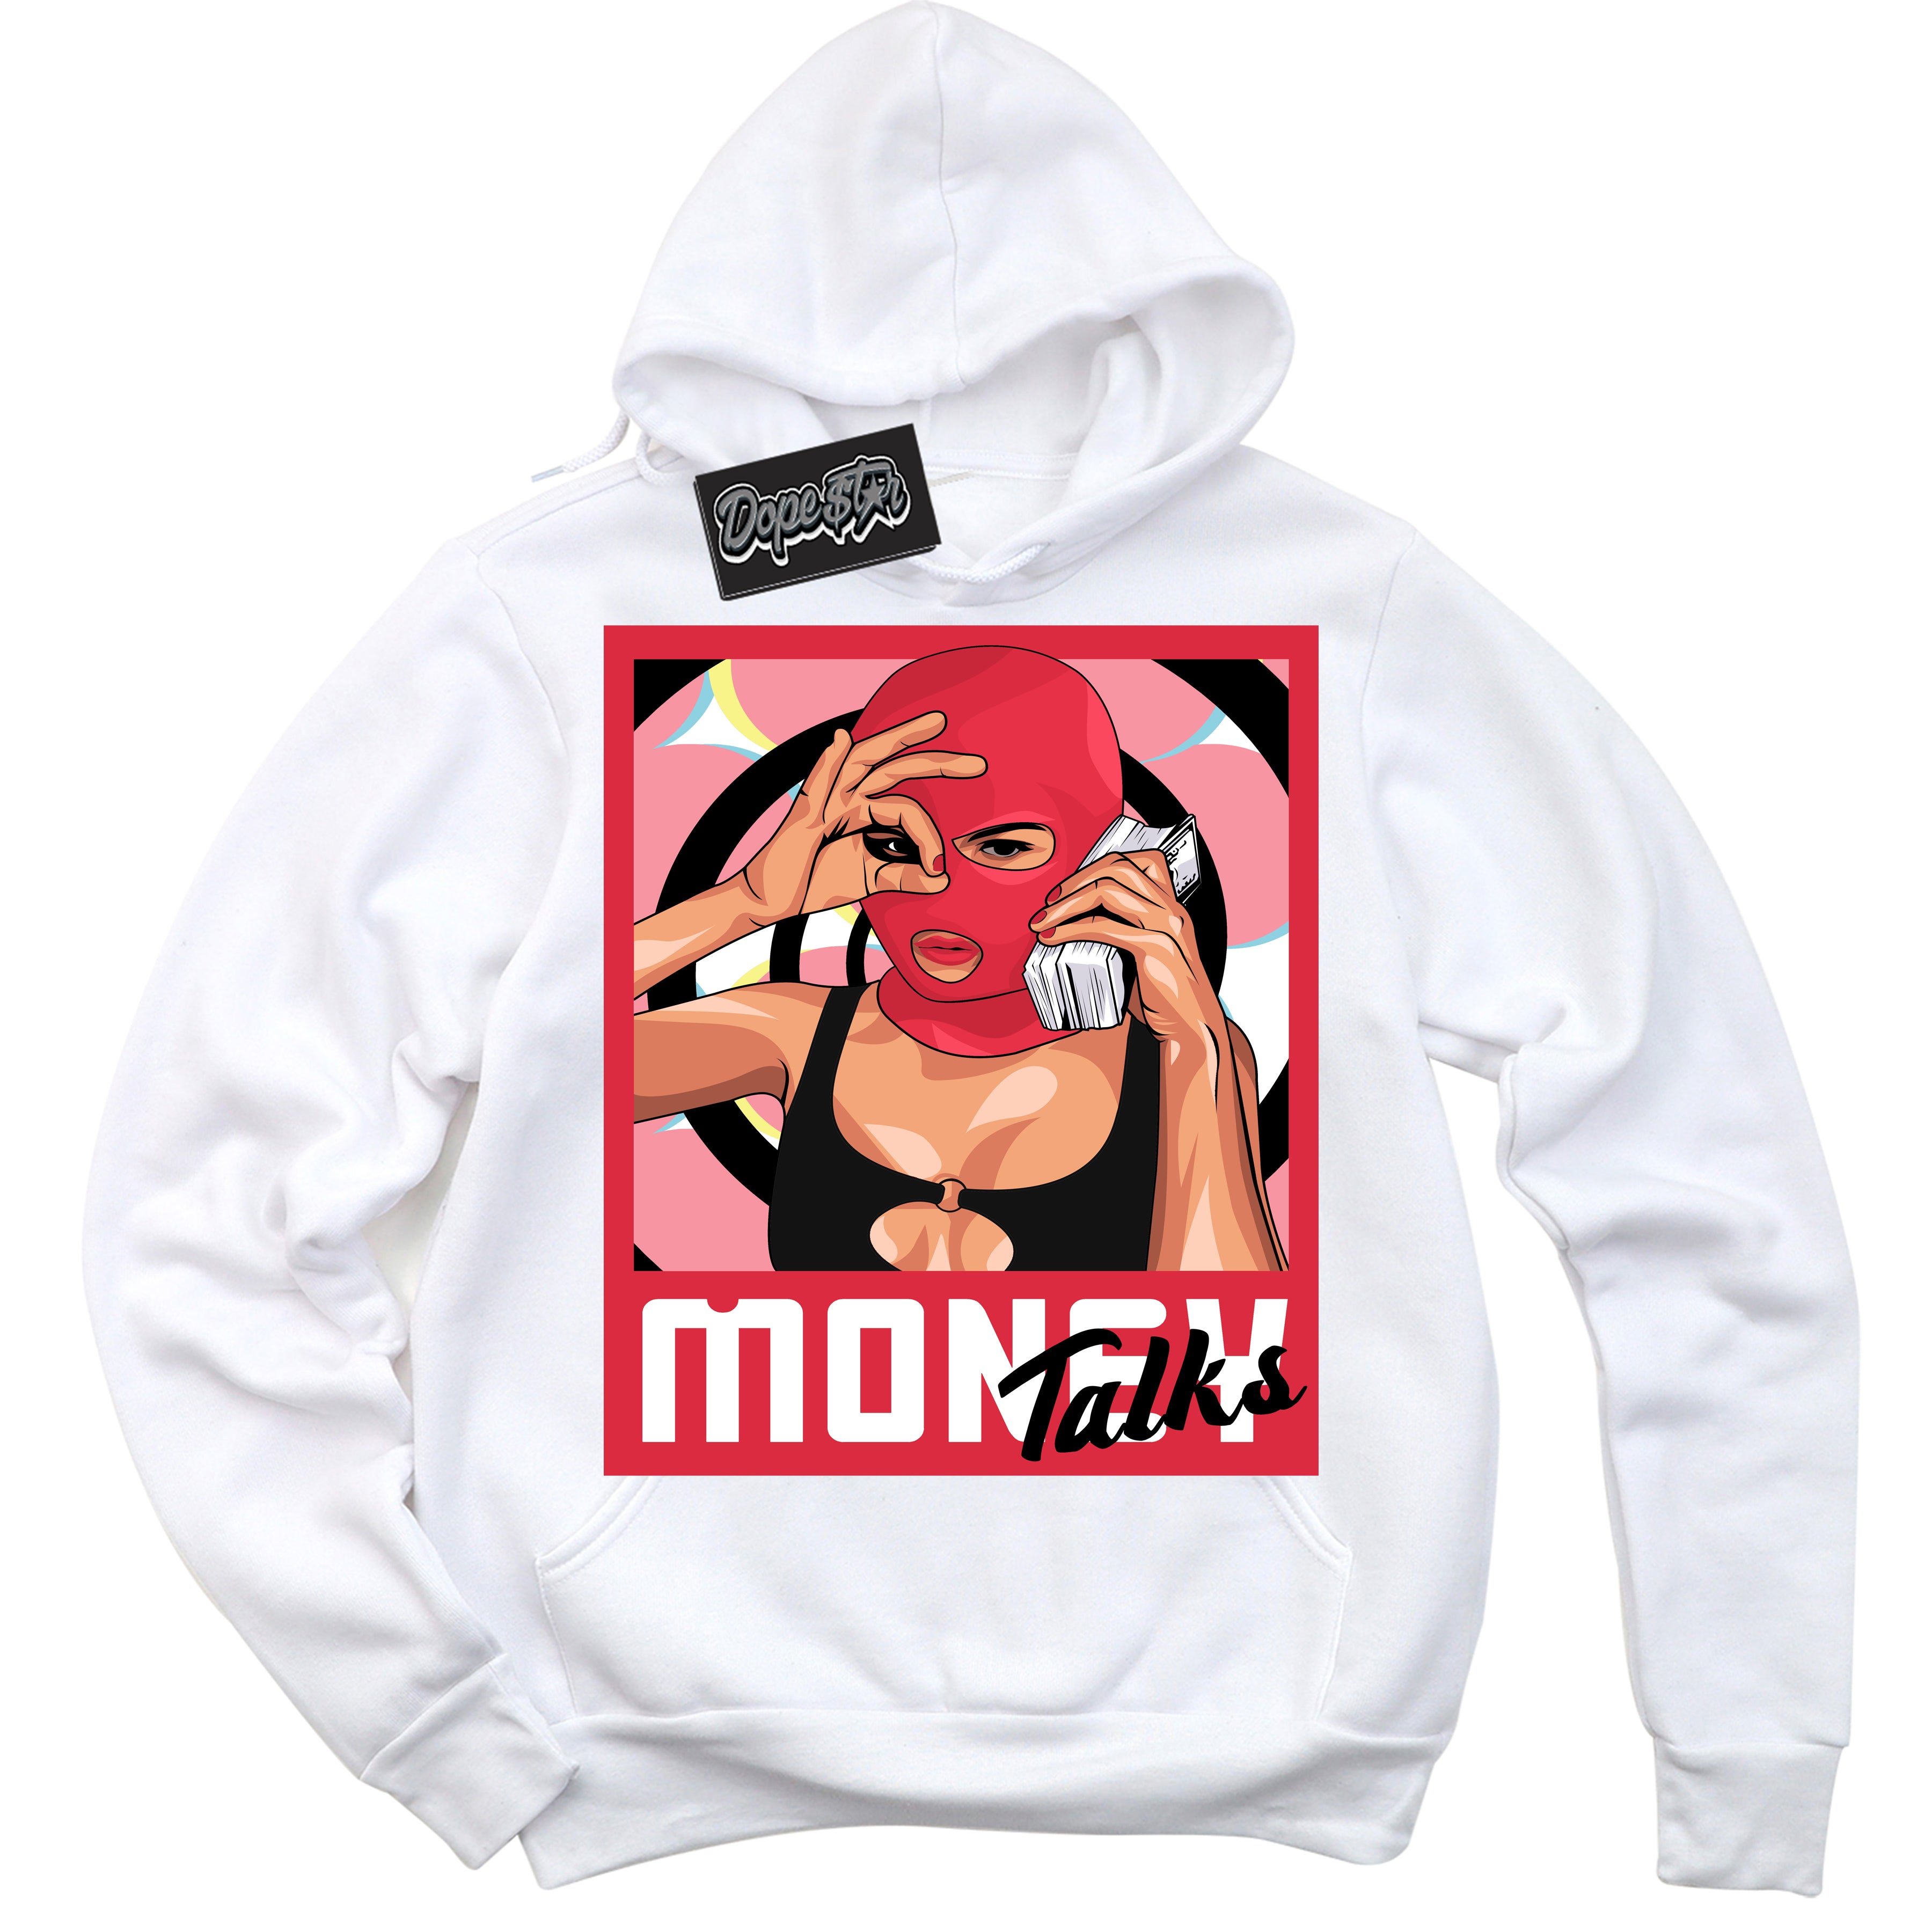 Cool White Graphic DopeStar Hoodie with “ Money Talks “ print, that perfectly matches Spider-Verse 1s sneakers